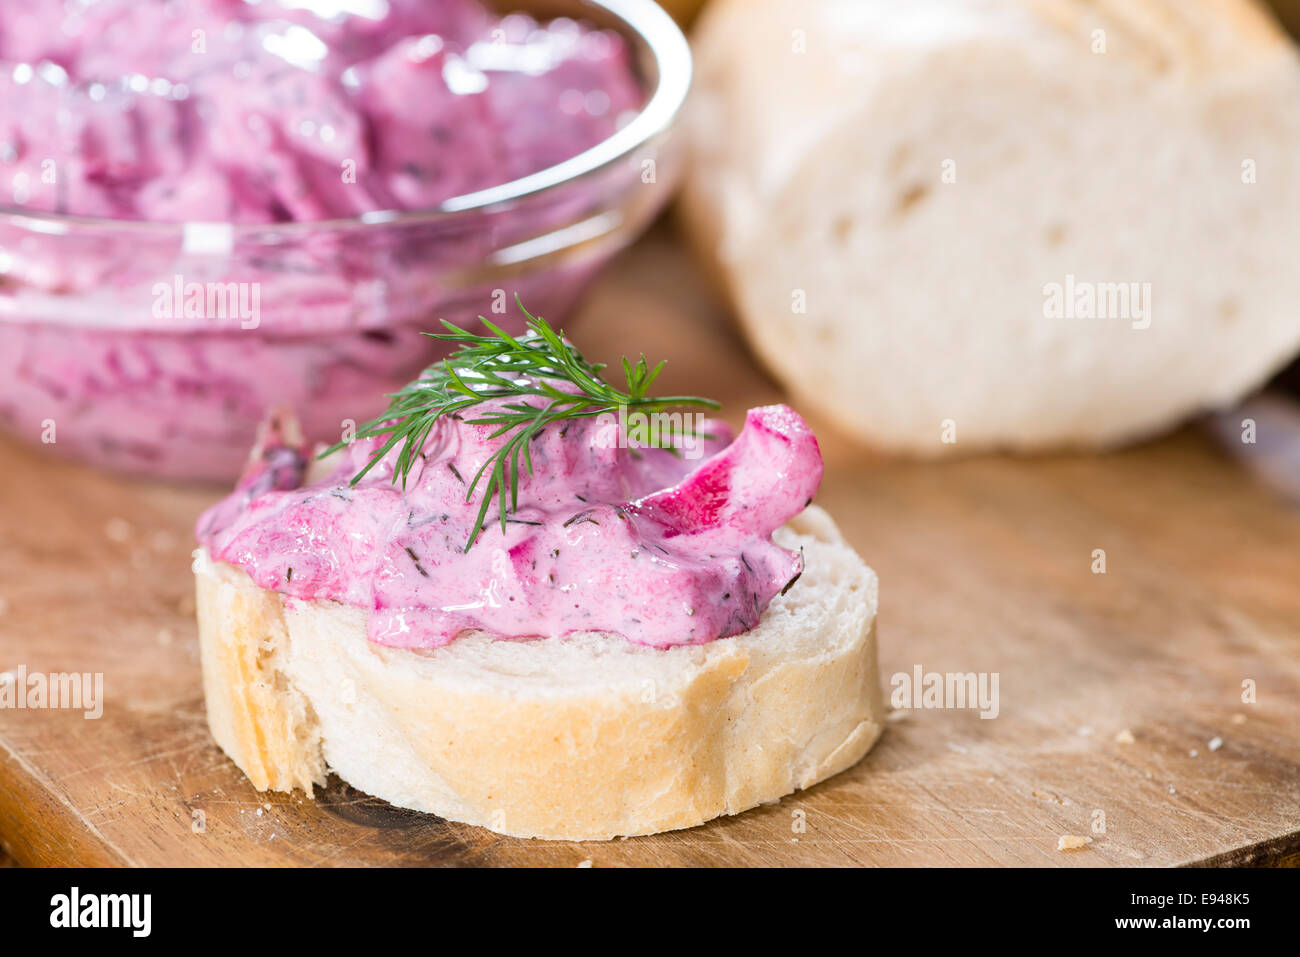 Portion of homemade Herring Salad (with beet) on wooden background Stock Photo